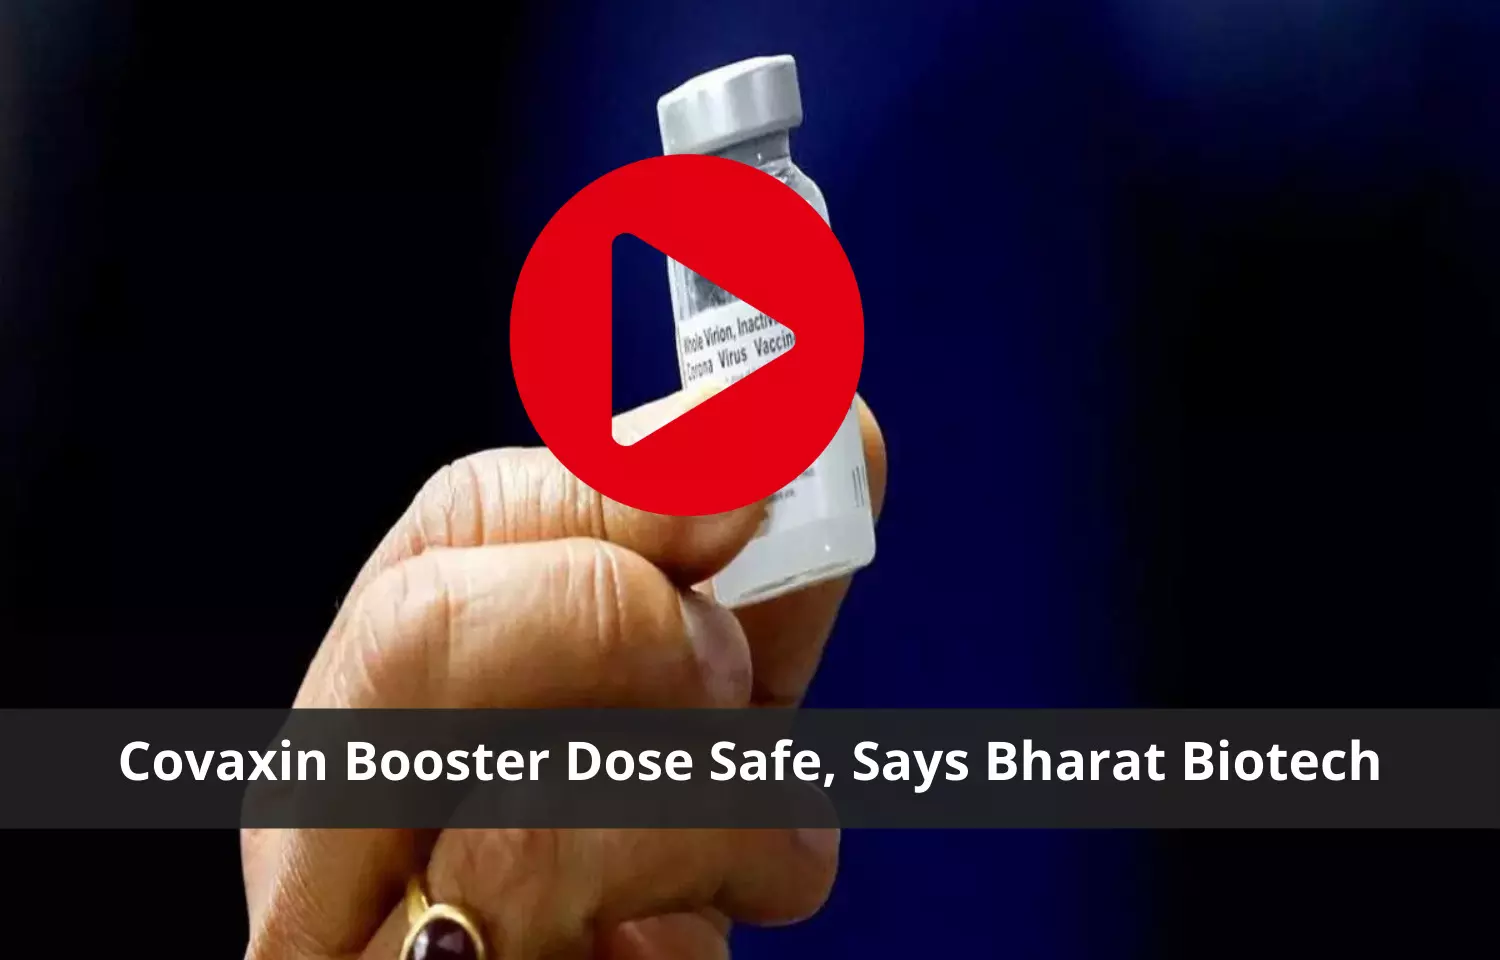 Covaxin booster dose safe: Bharat Biotech